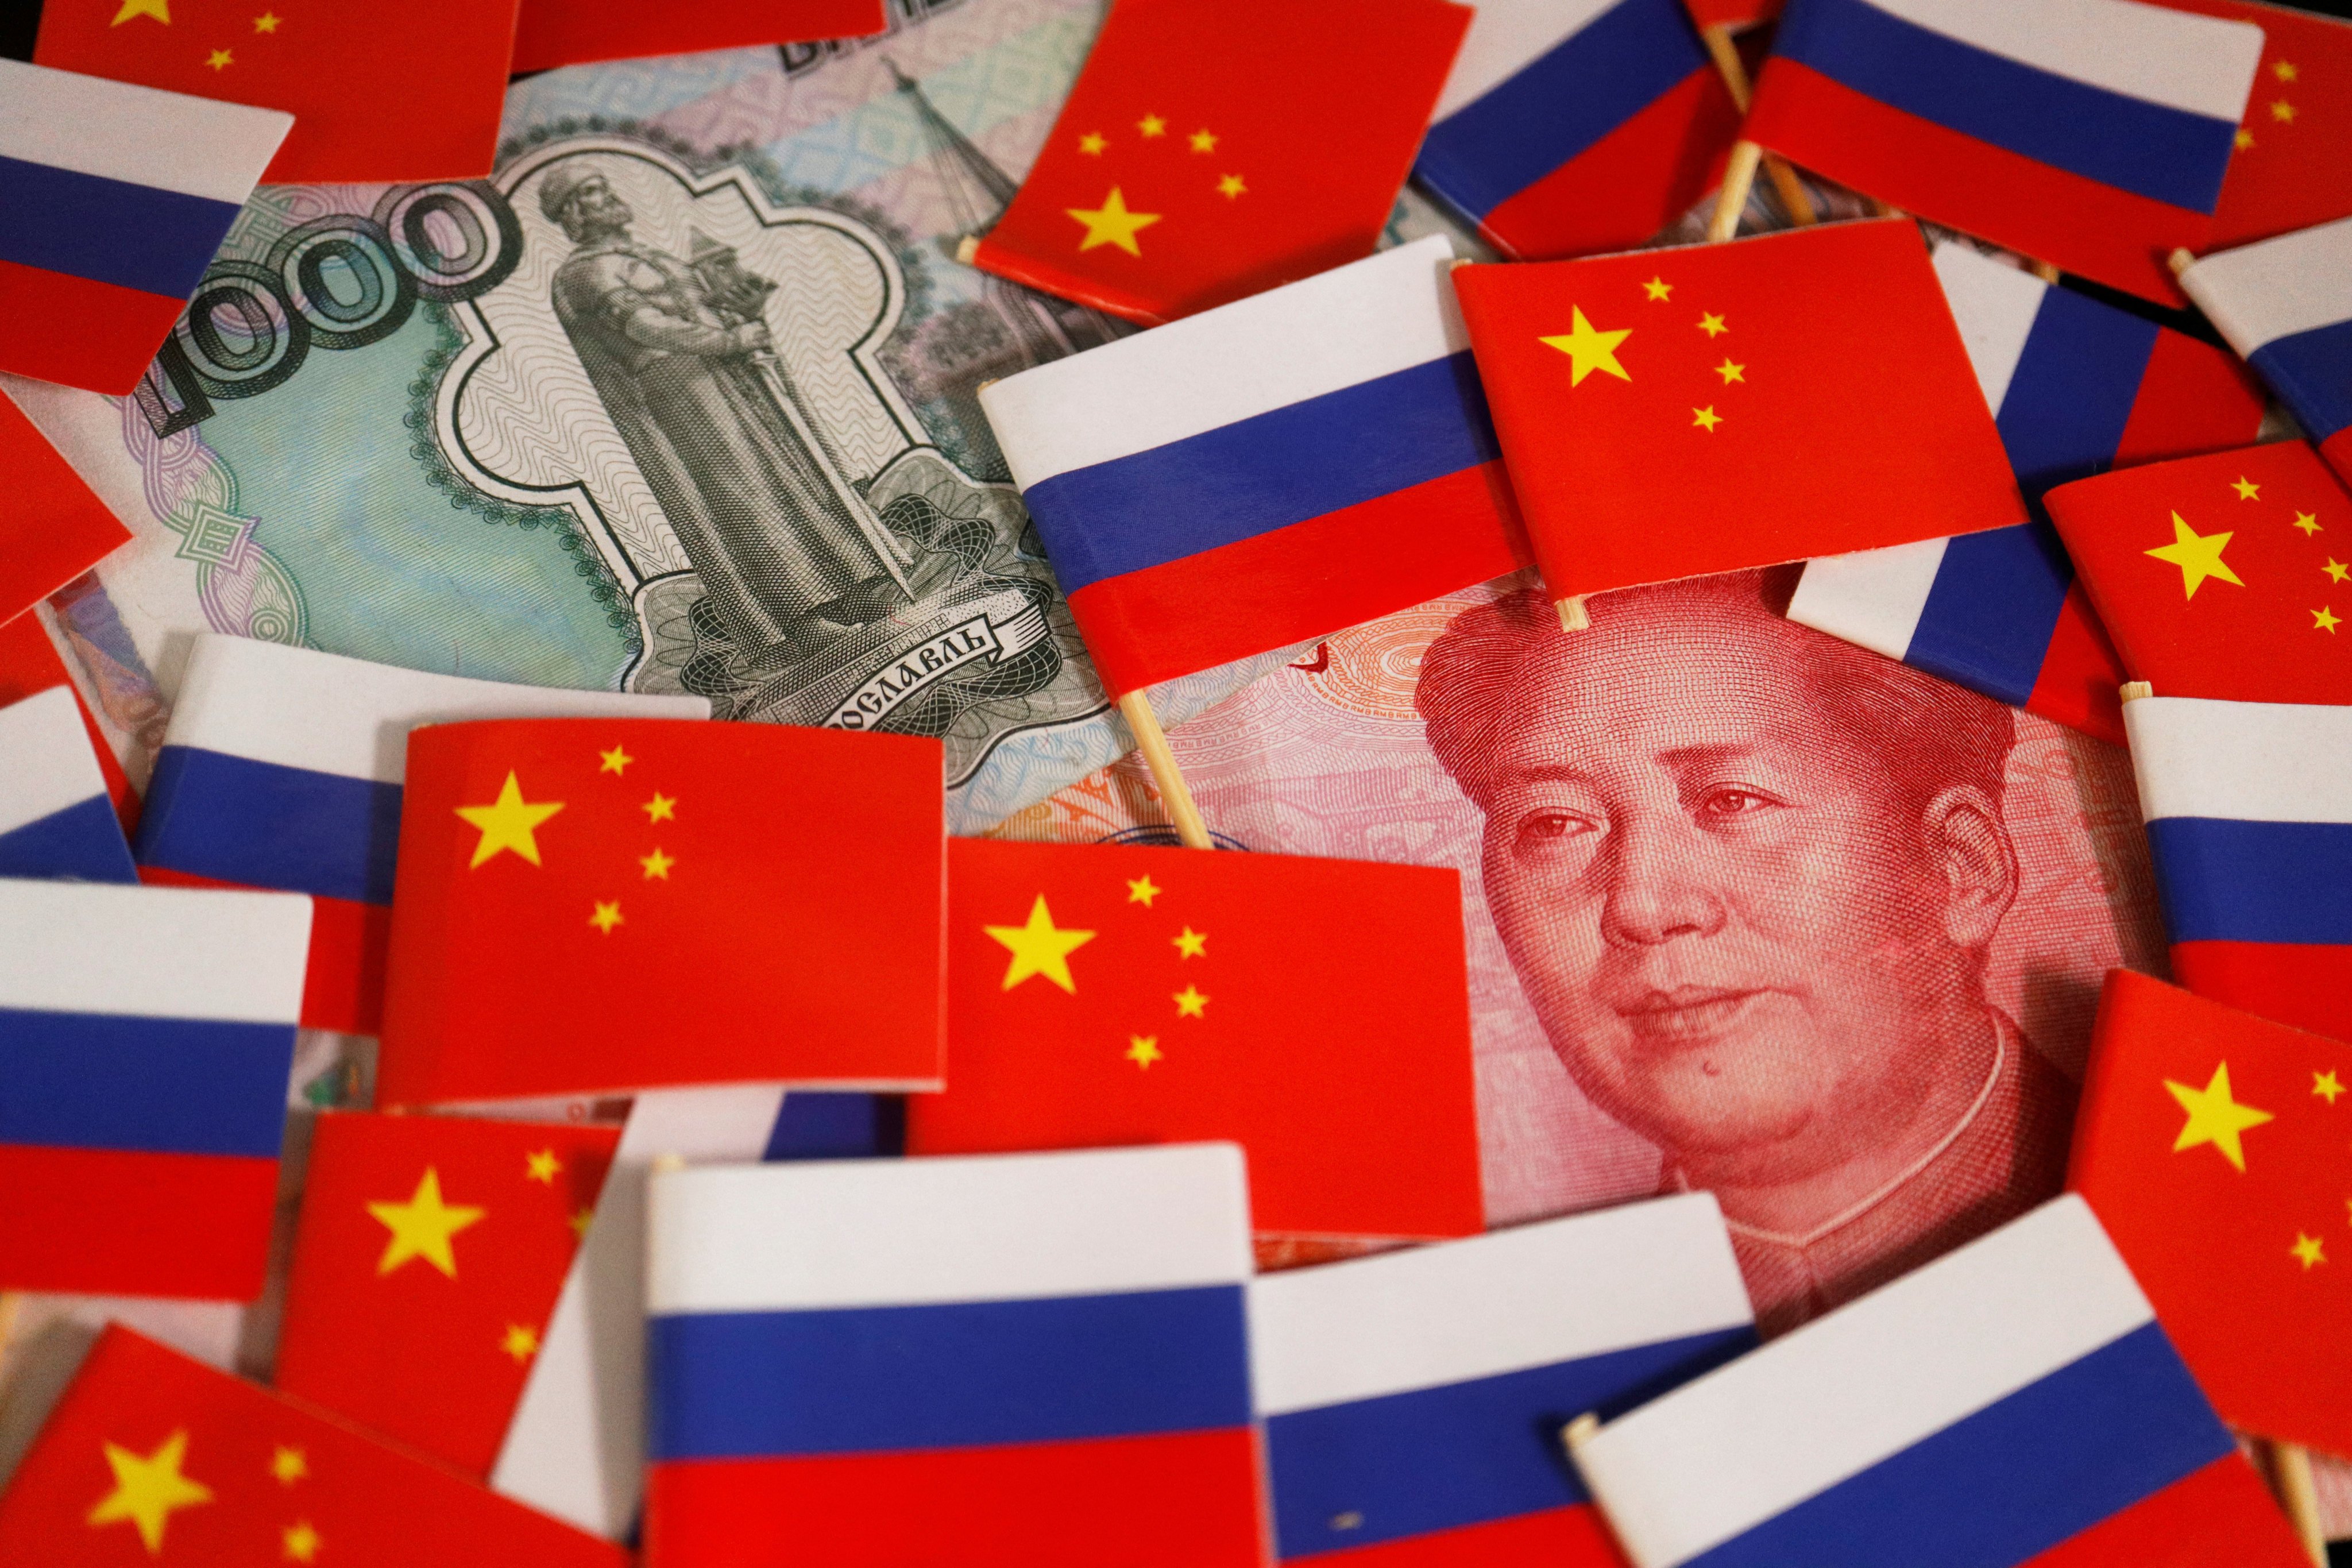 Transactions between Russia and China are being looked at more closely by Chinese banks as the threat of Western sanctions looms. Photo: Reuters